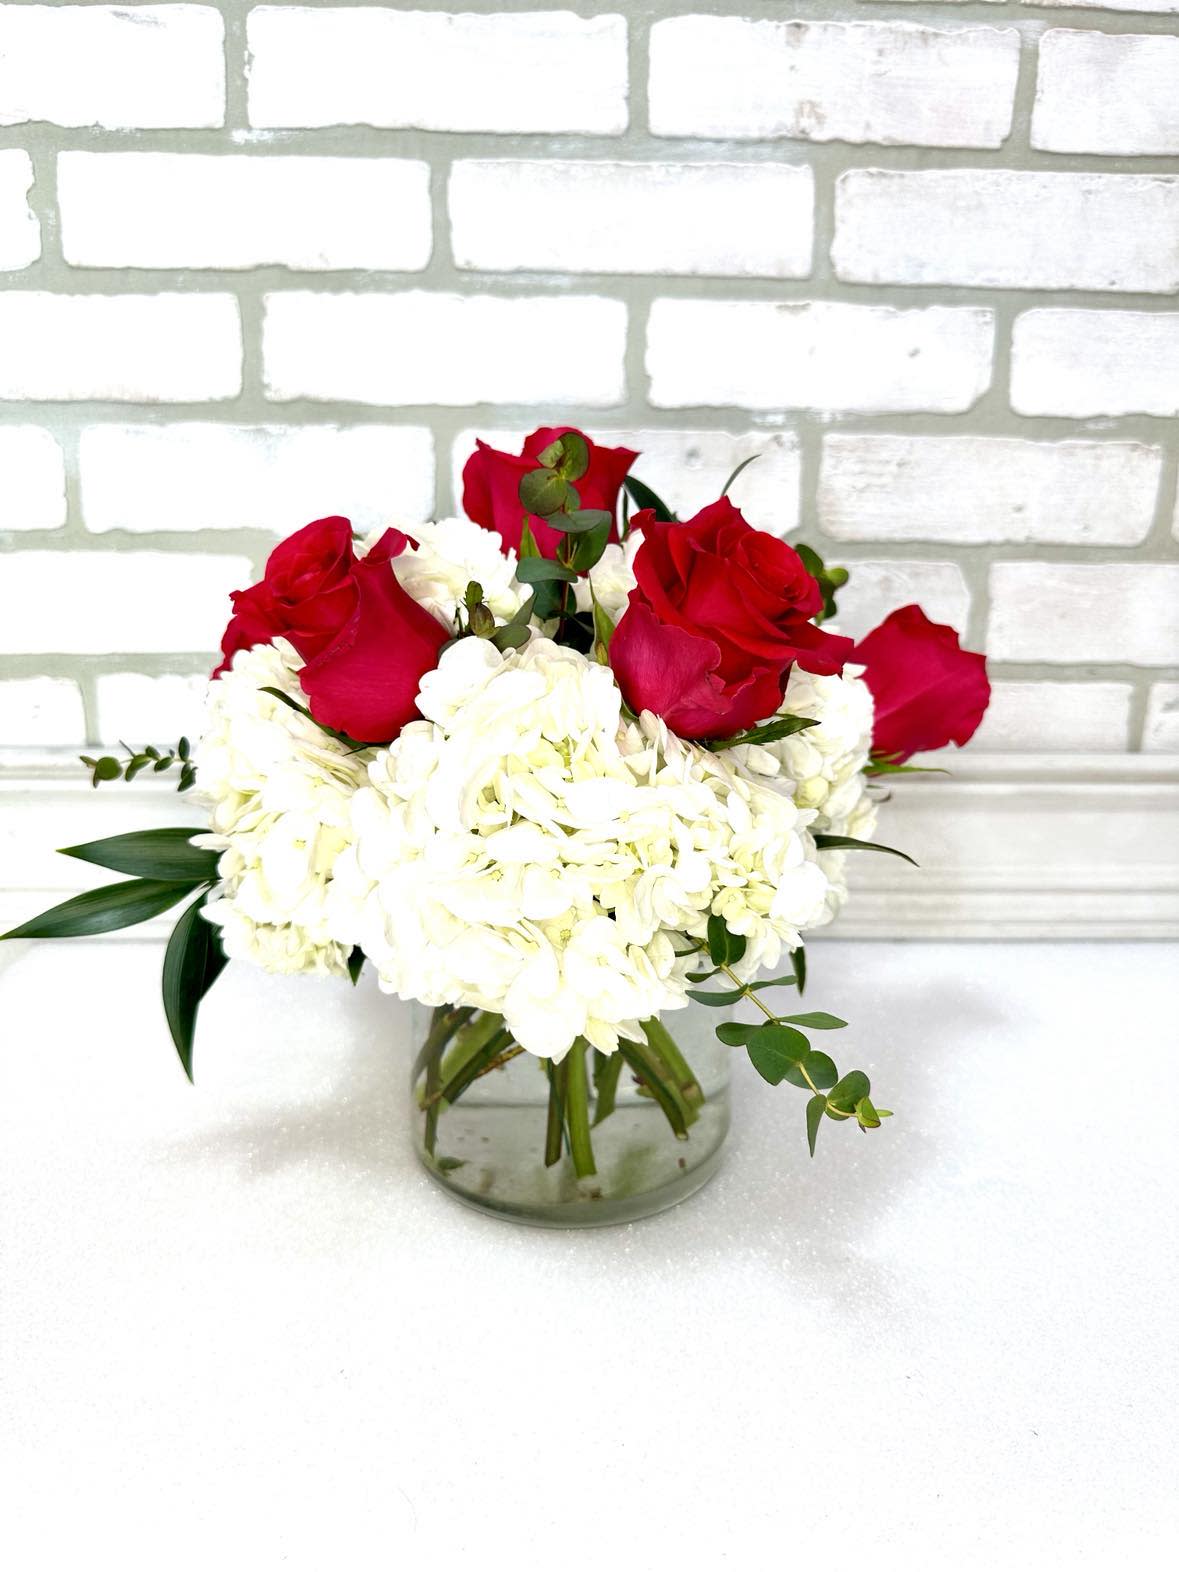 Simplicity with Roses  - Amy's favorite combination - roses and hydrangeas. Simple and elegant. Design includes 6 roses and white hydrangeas. Upgrade to Deluxe or Premium to add more roses and blooms. 